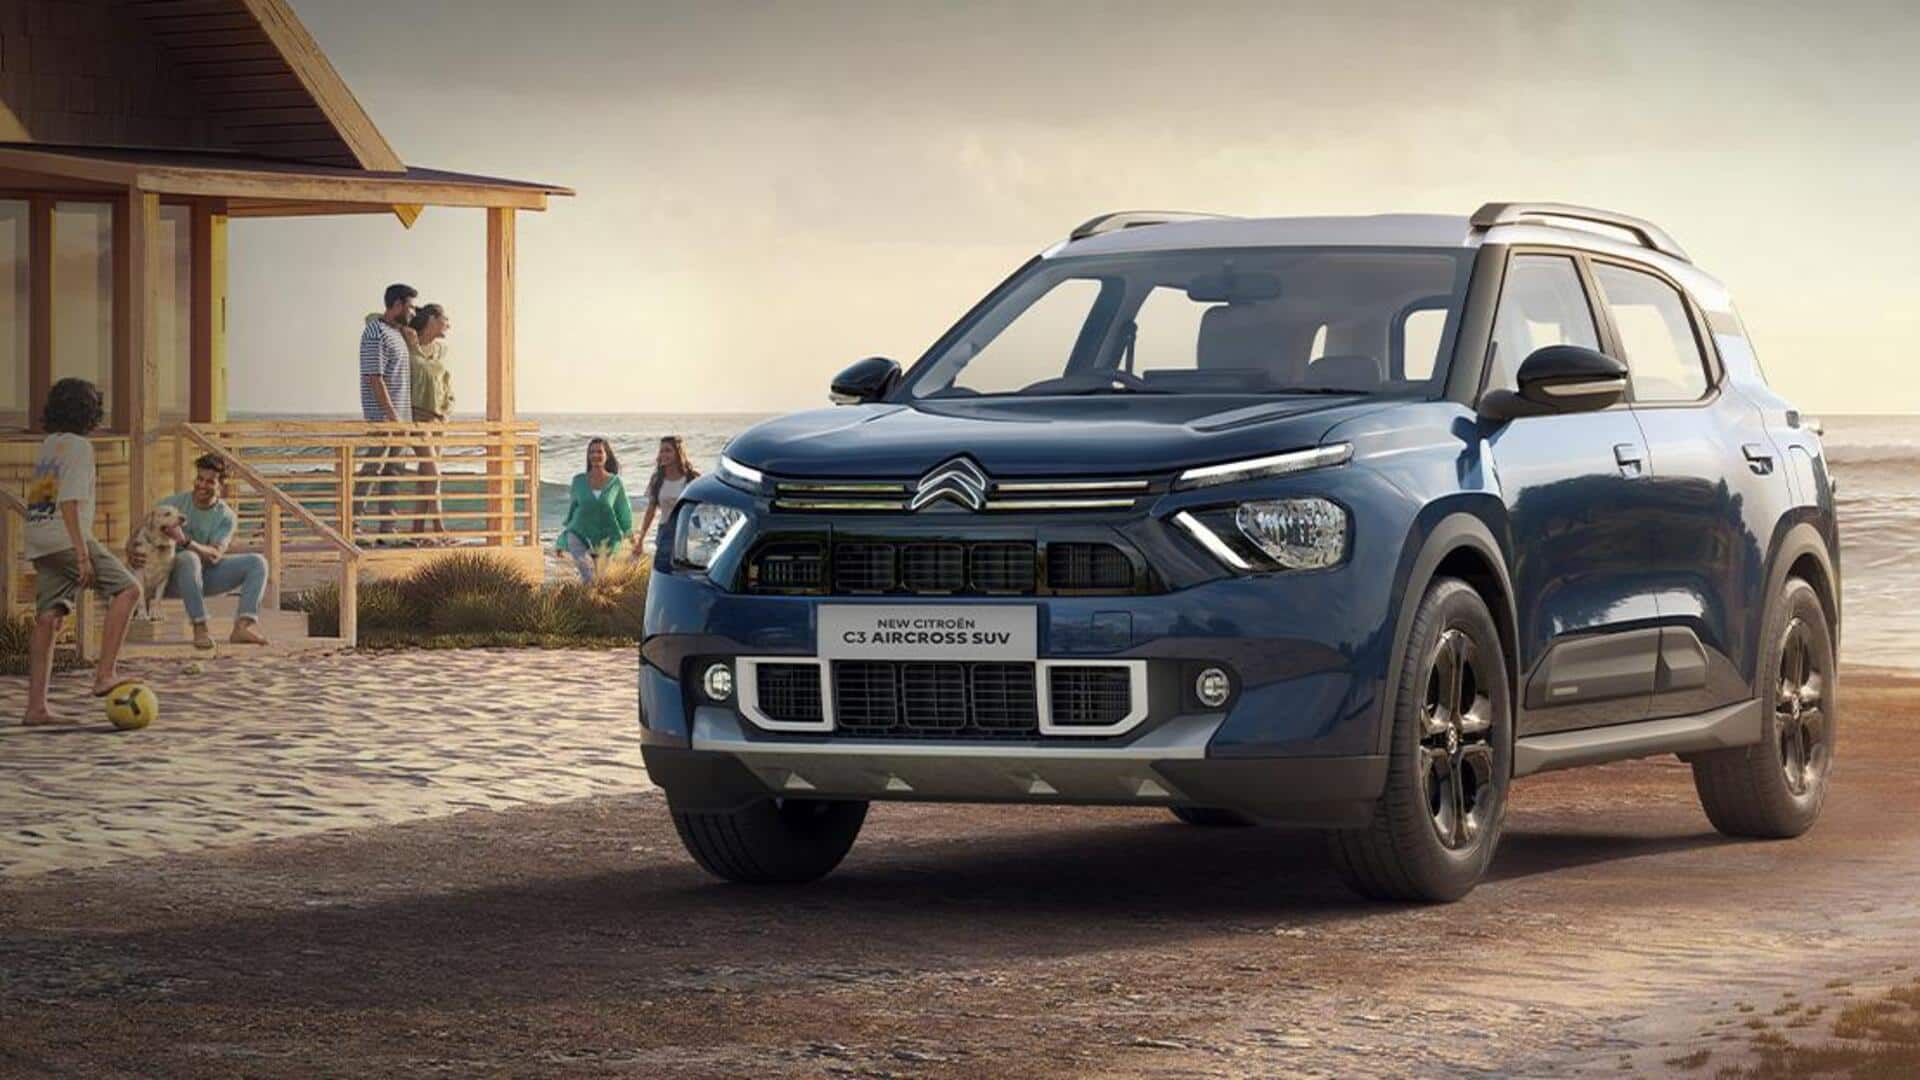 Citroen offering big discounts on its cars this Diwali